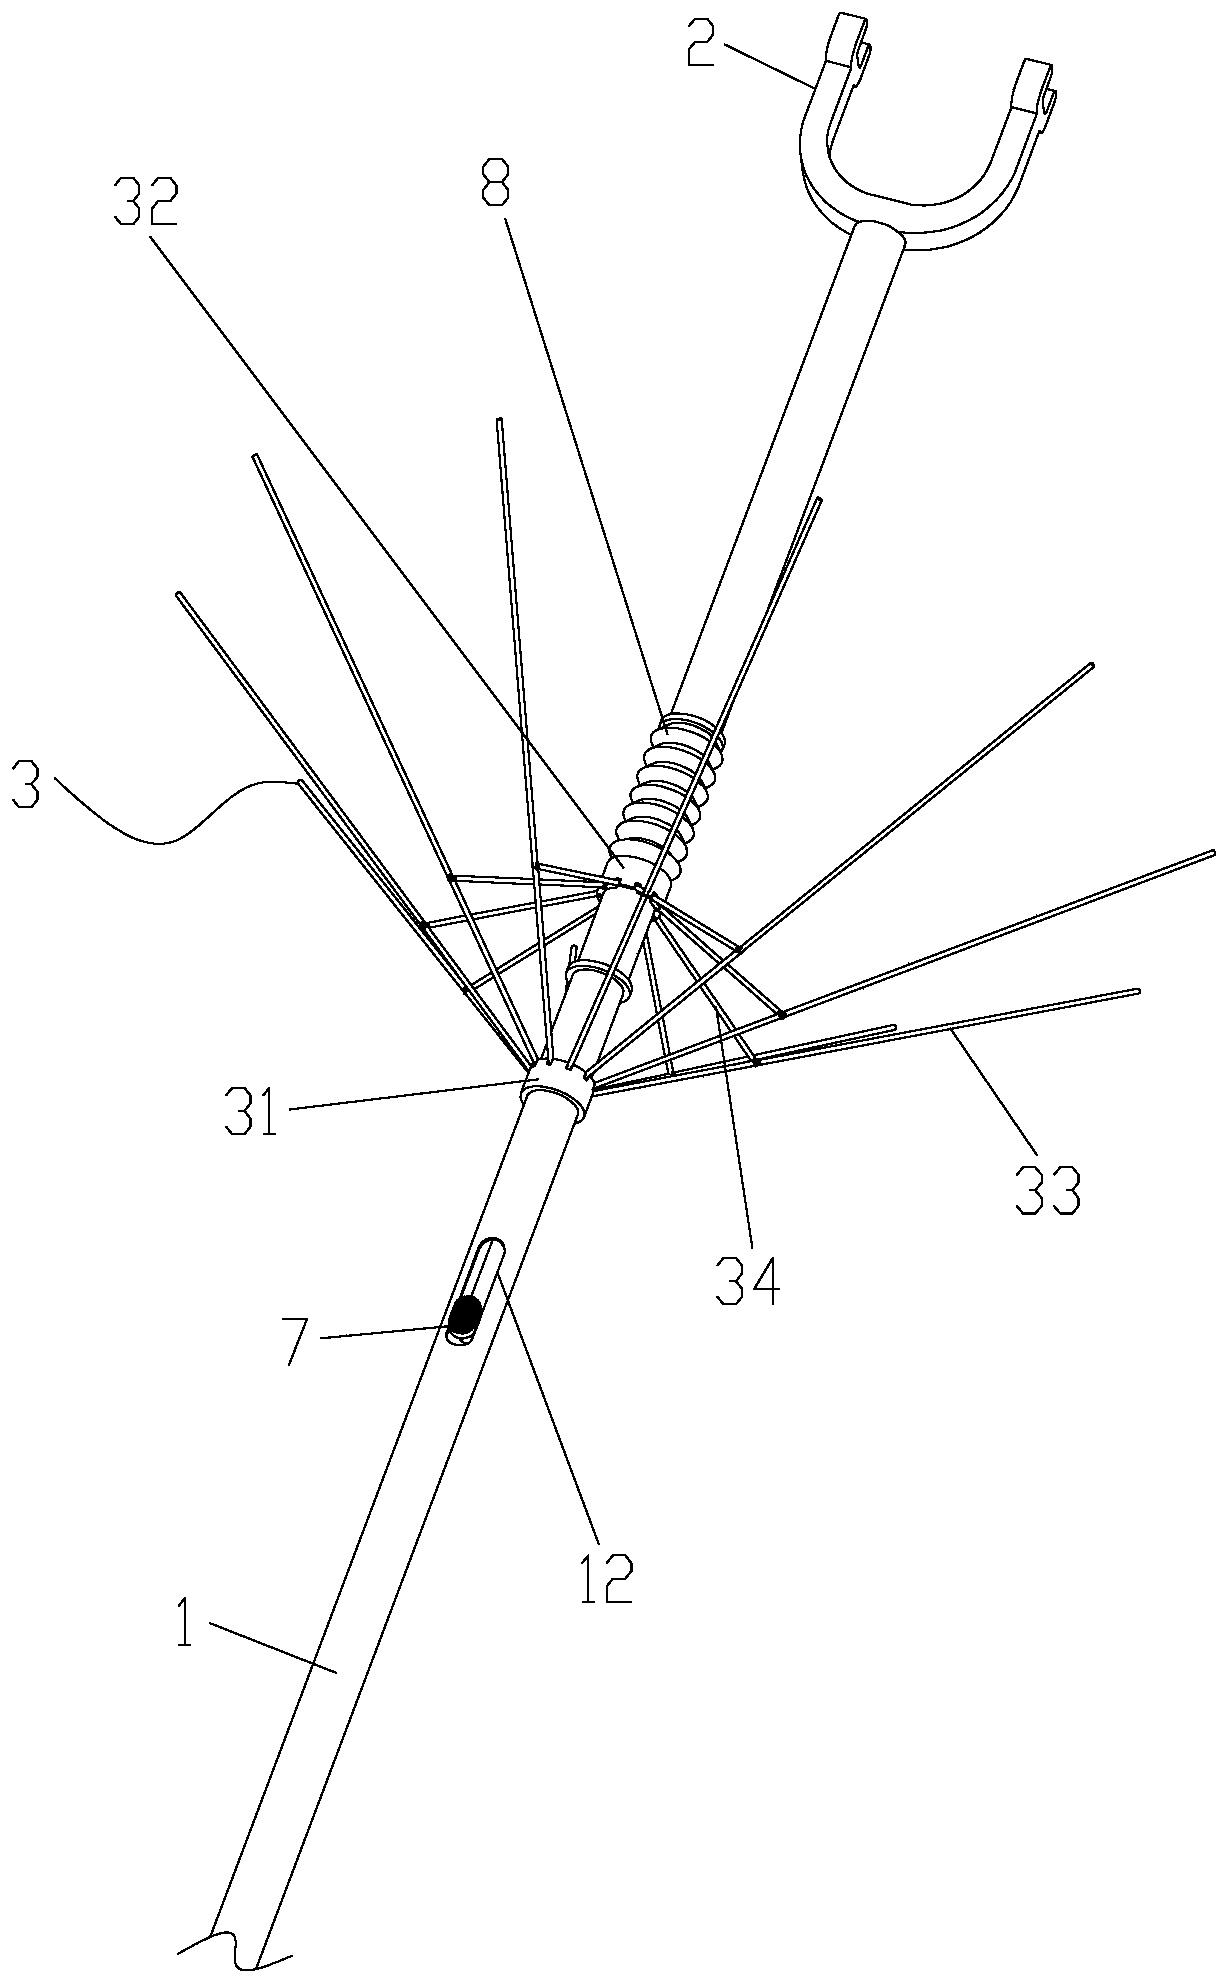 Clothes supporting rod structure